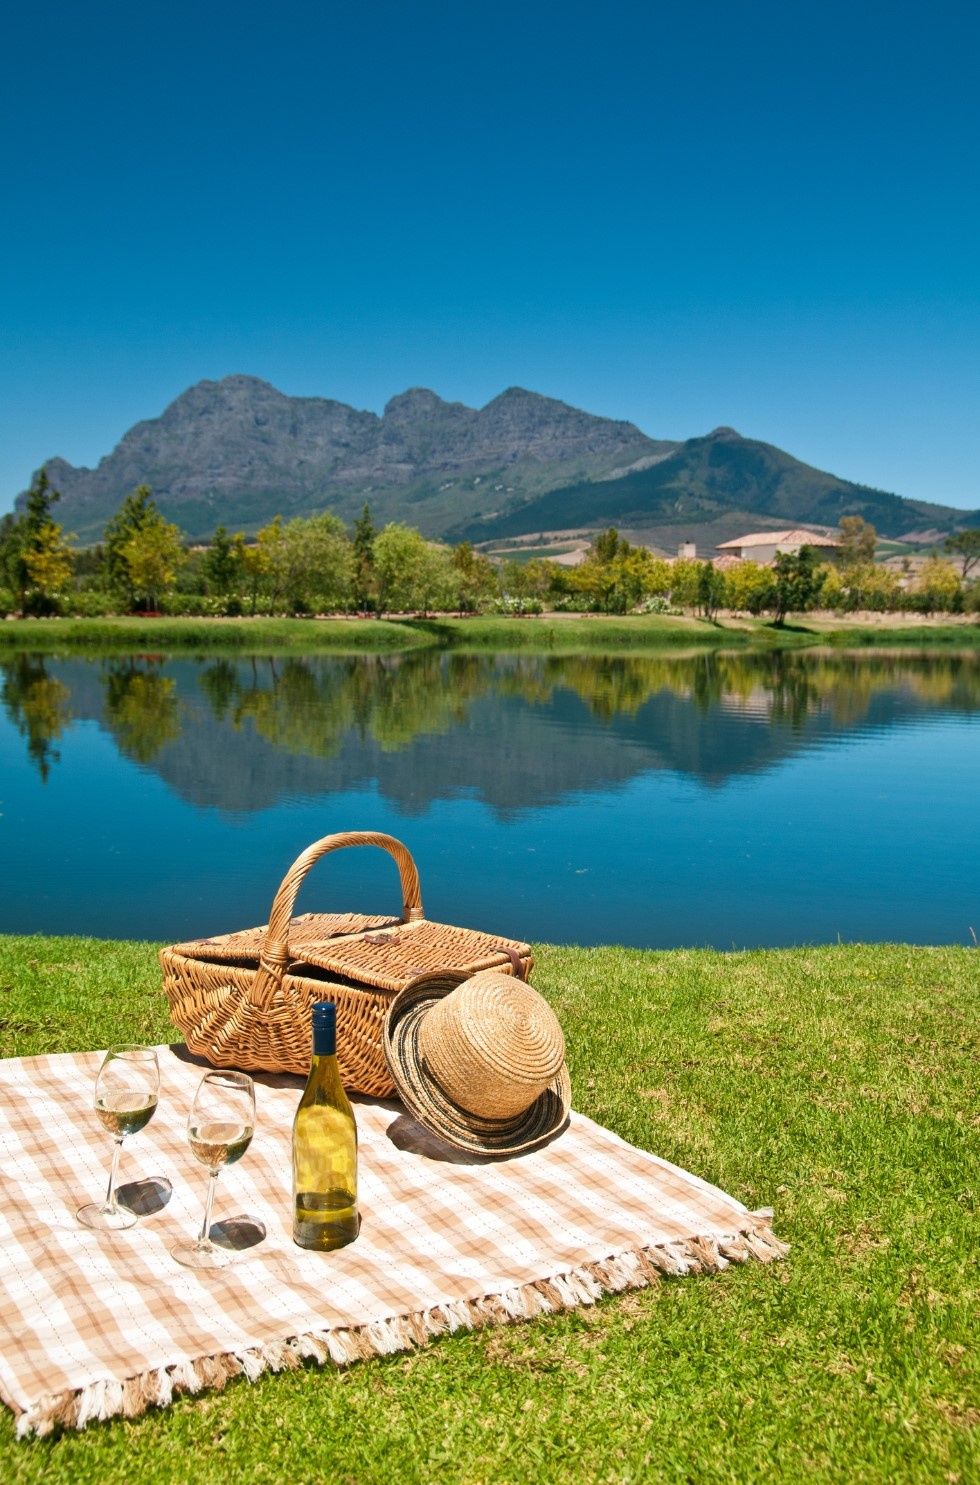 Luxury picnic beside a lake in front of a mountain